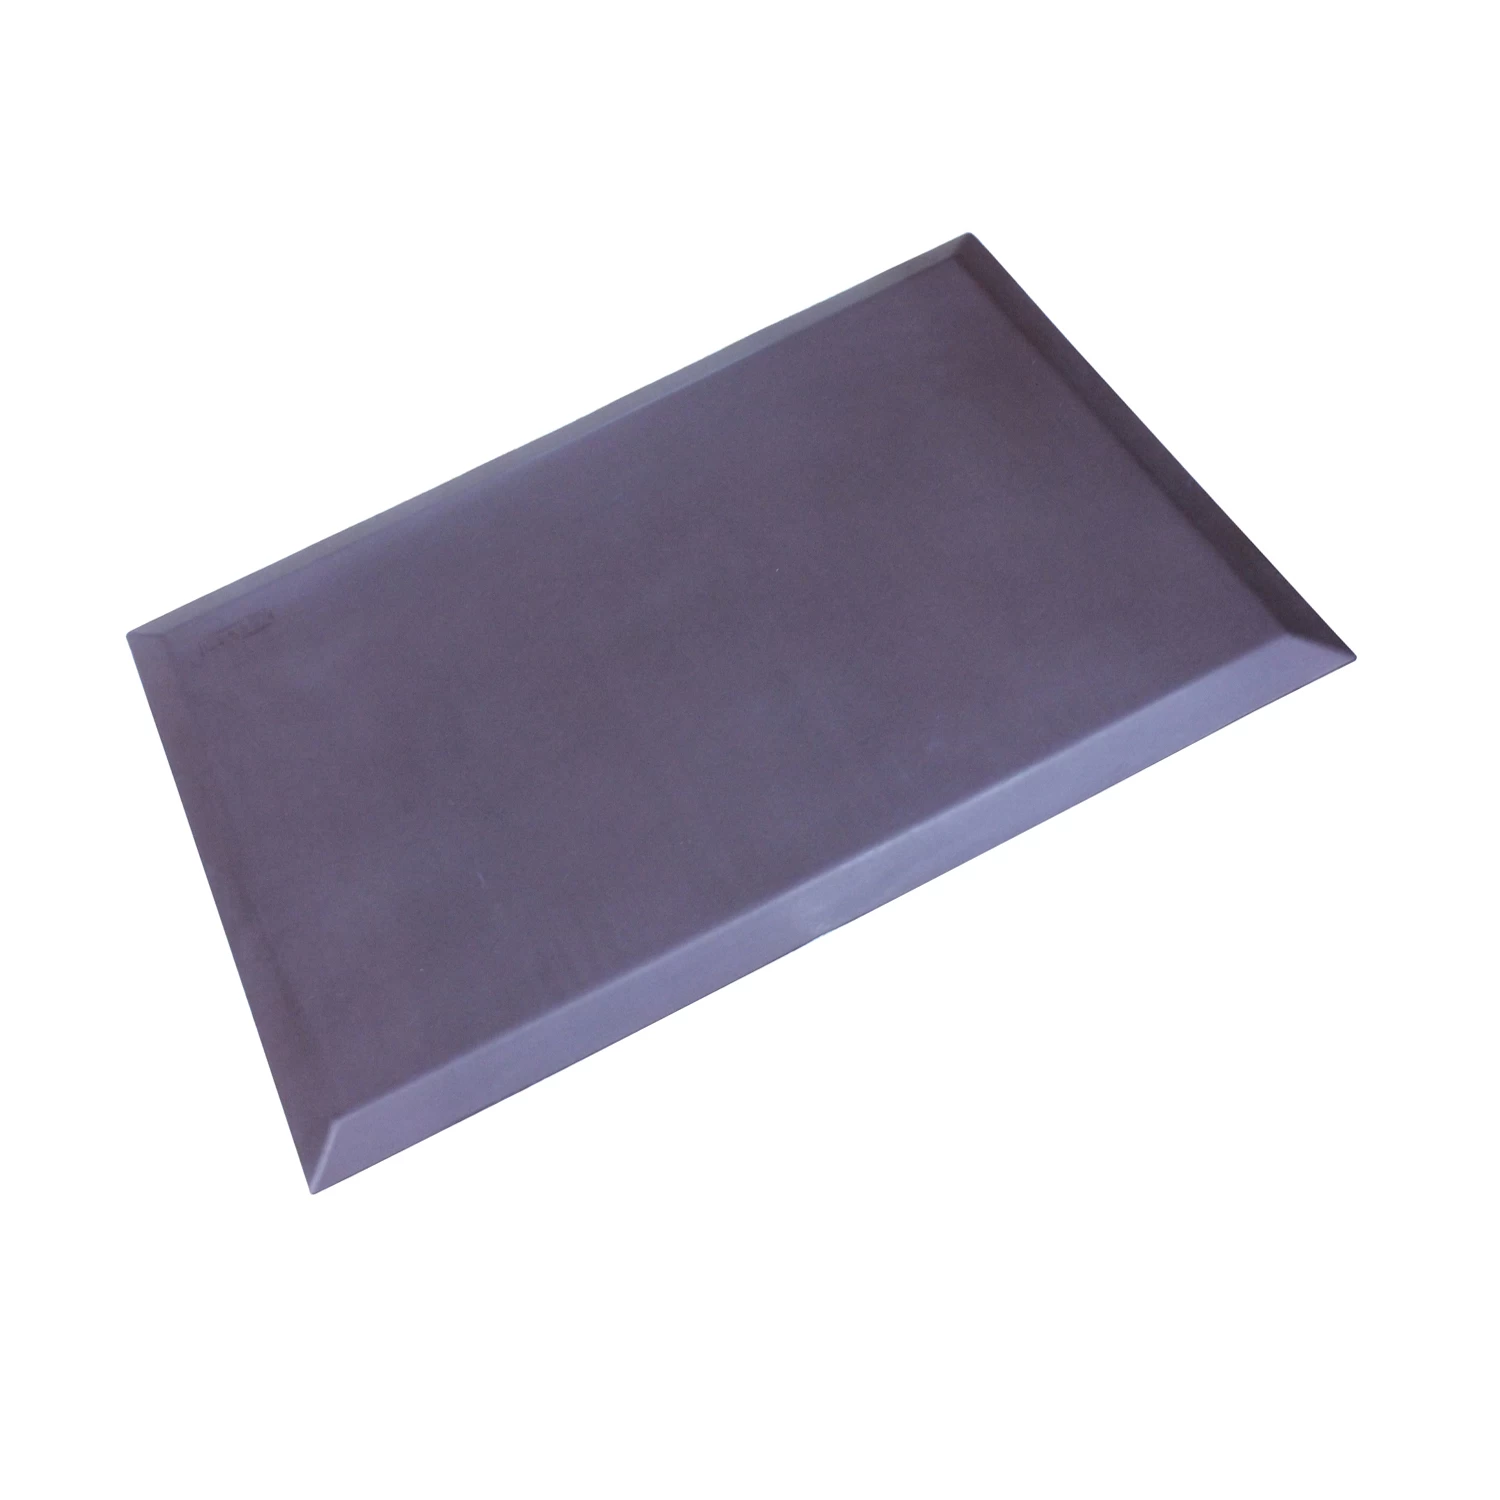 Chine Good Quality Pu Anti Fatigue Standing Desk Mat,PU floor mat,standing desk mat,anti-fatigue floor mat fabricant